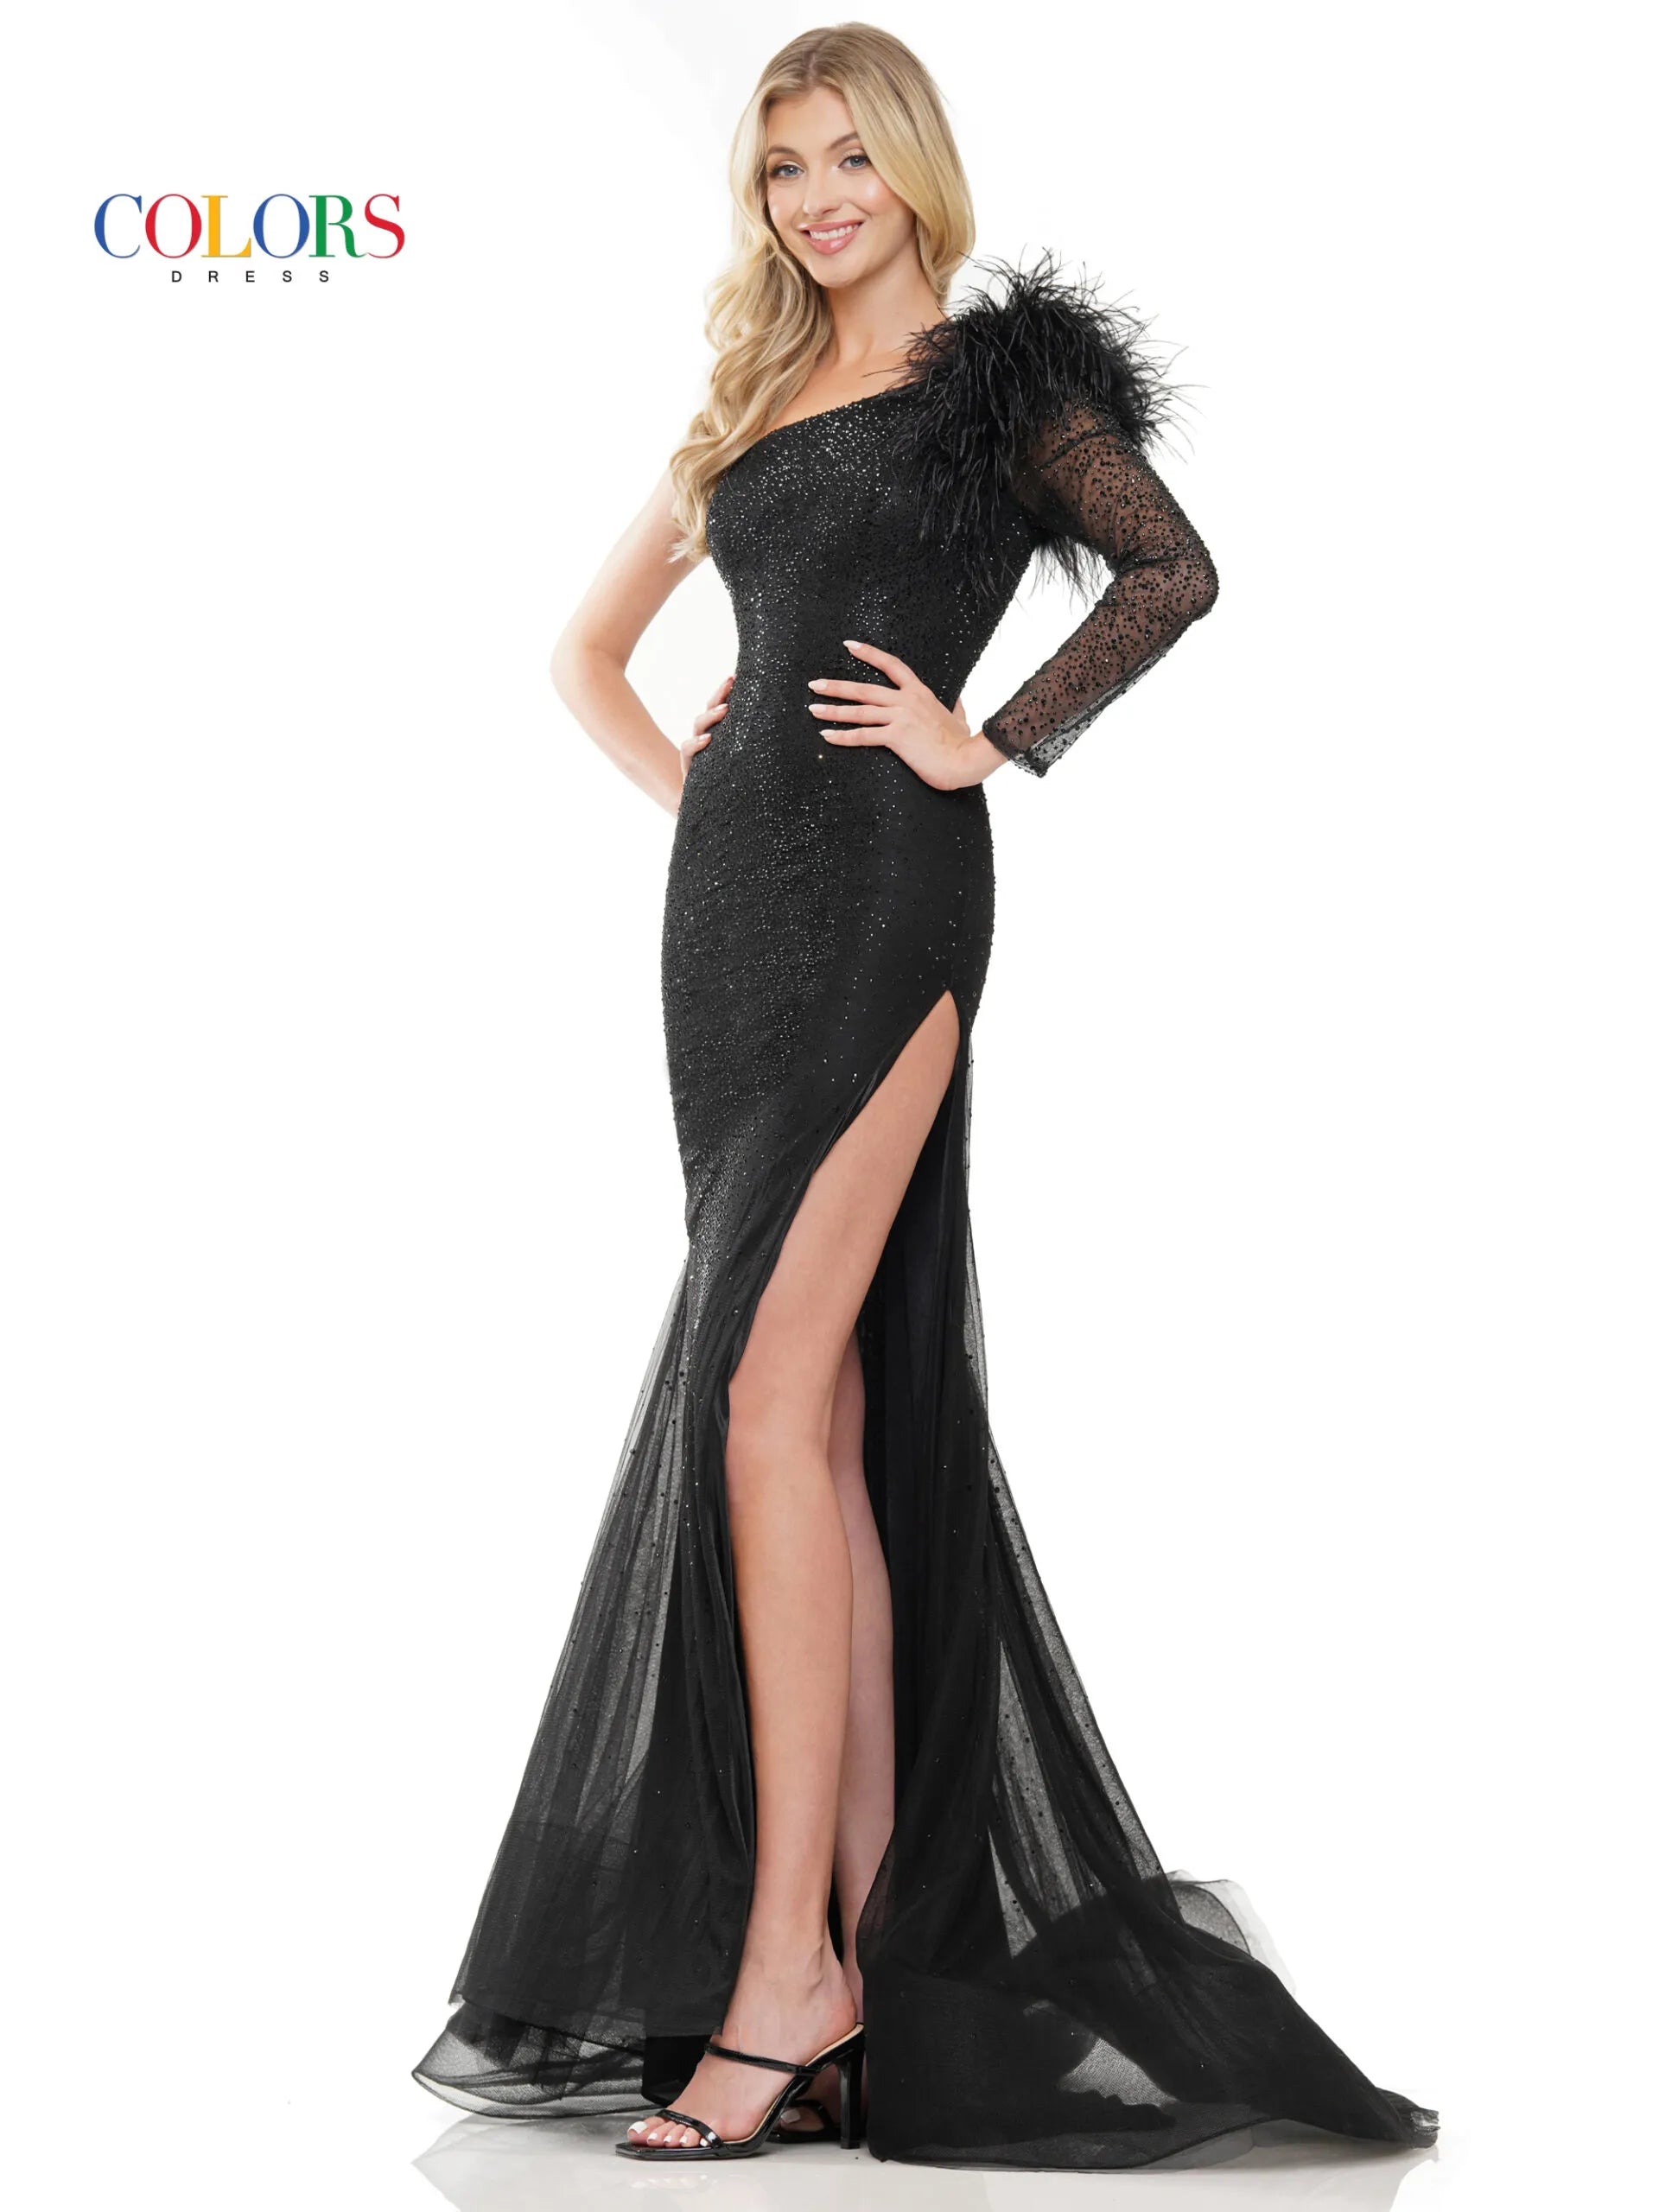 This Colors Dress 3251 one shoulder long sleeve feather prom dress will make you stand out at any formal event. The high slit and sheer feather details add a touch of elegance, while the crystal embellishments add a touch of sparkle. Perfect for those who want to make a statement with their fashion choices.  Sizes: 0-22  Colors: Black, Royal, Deep Green, Hot Pink